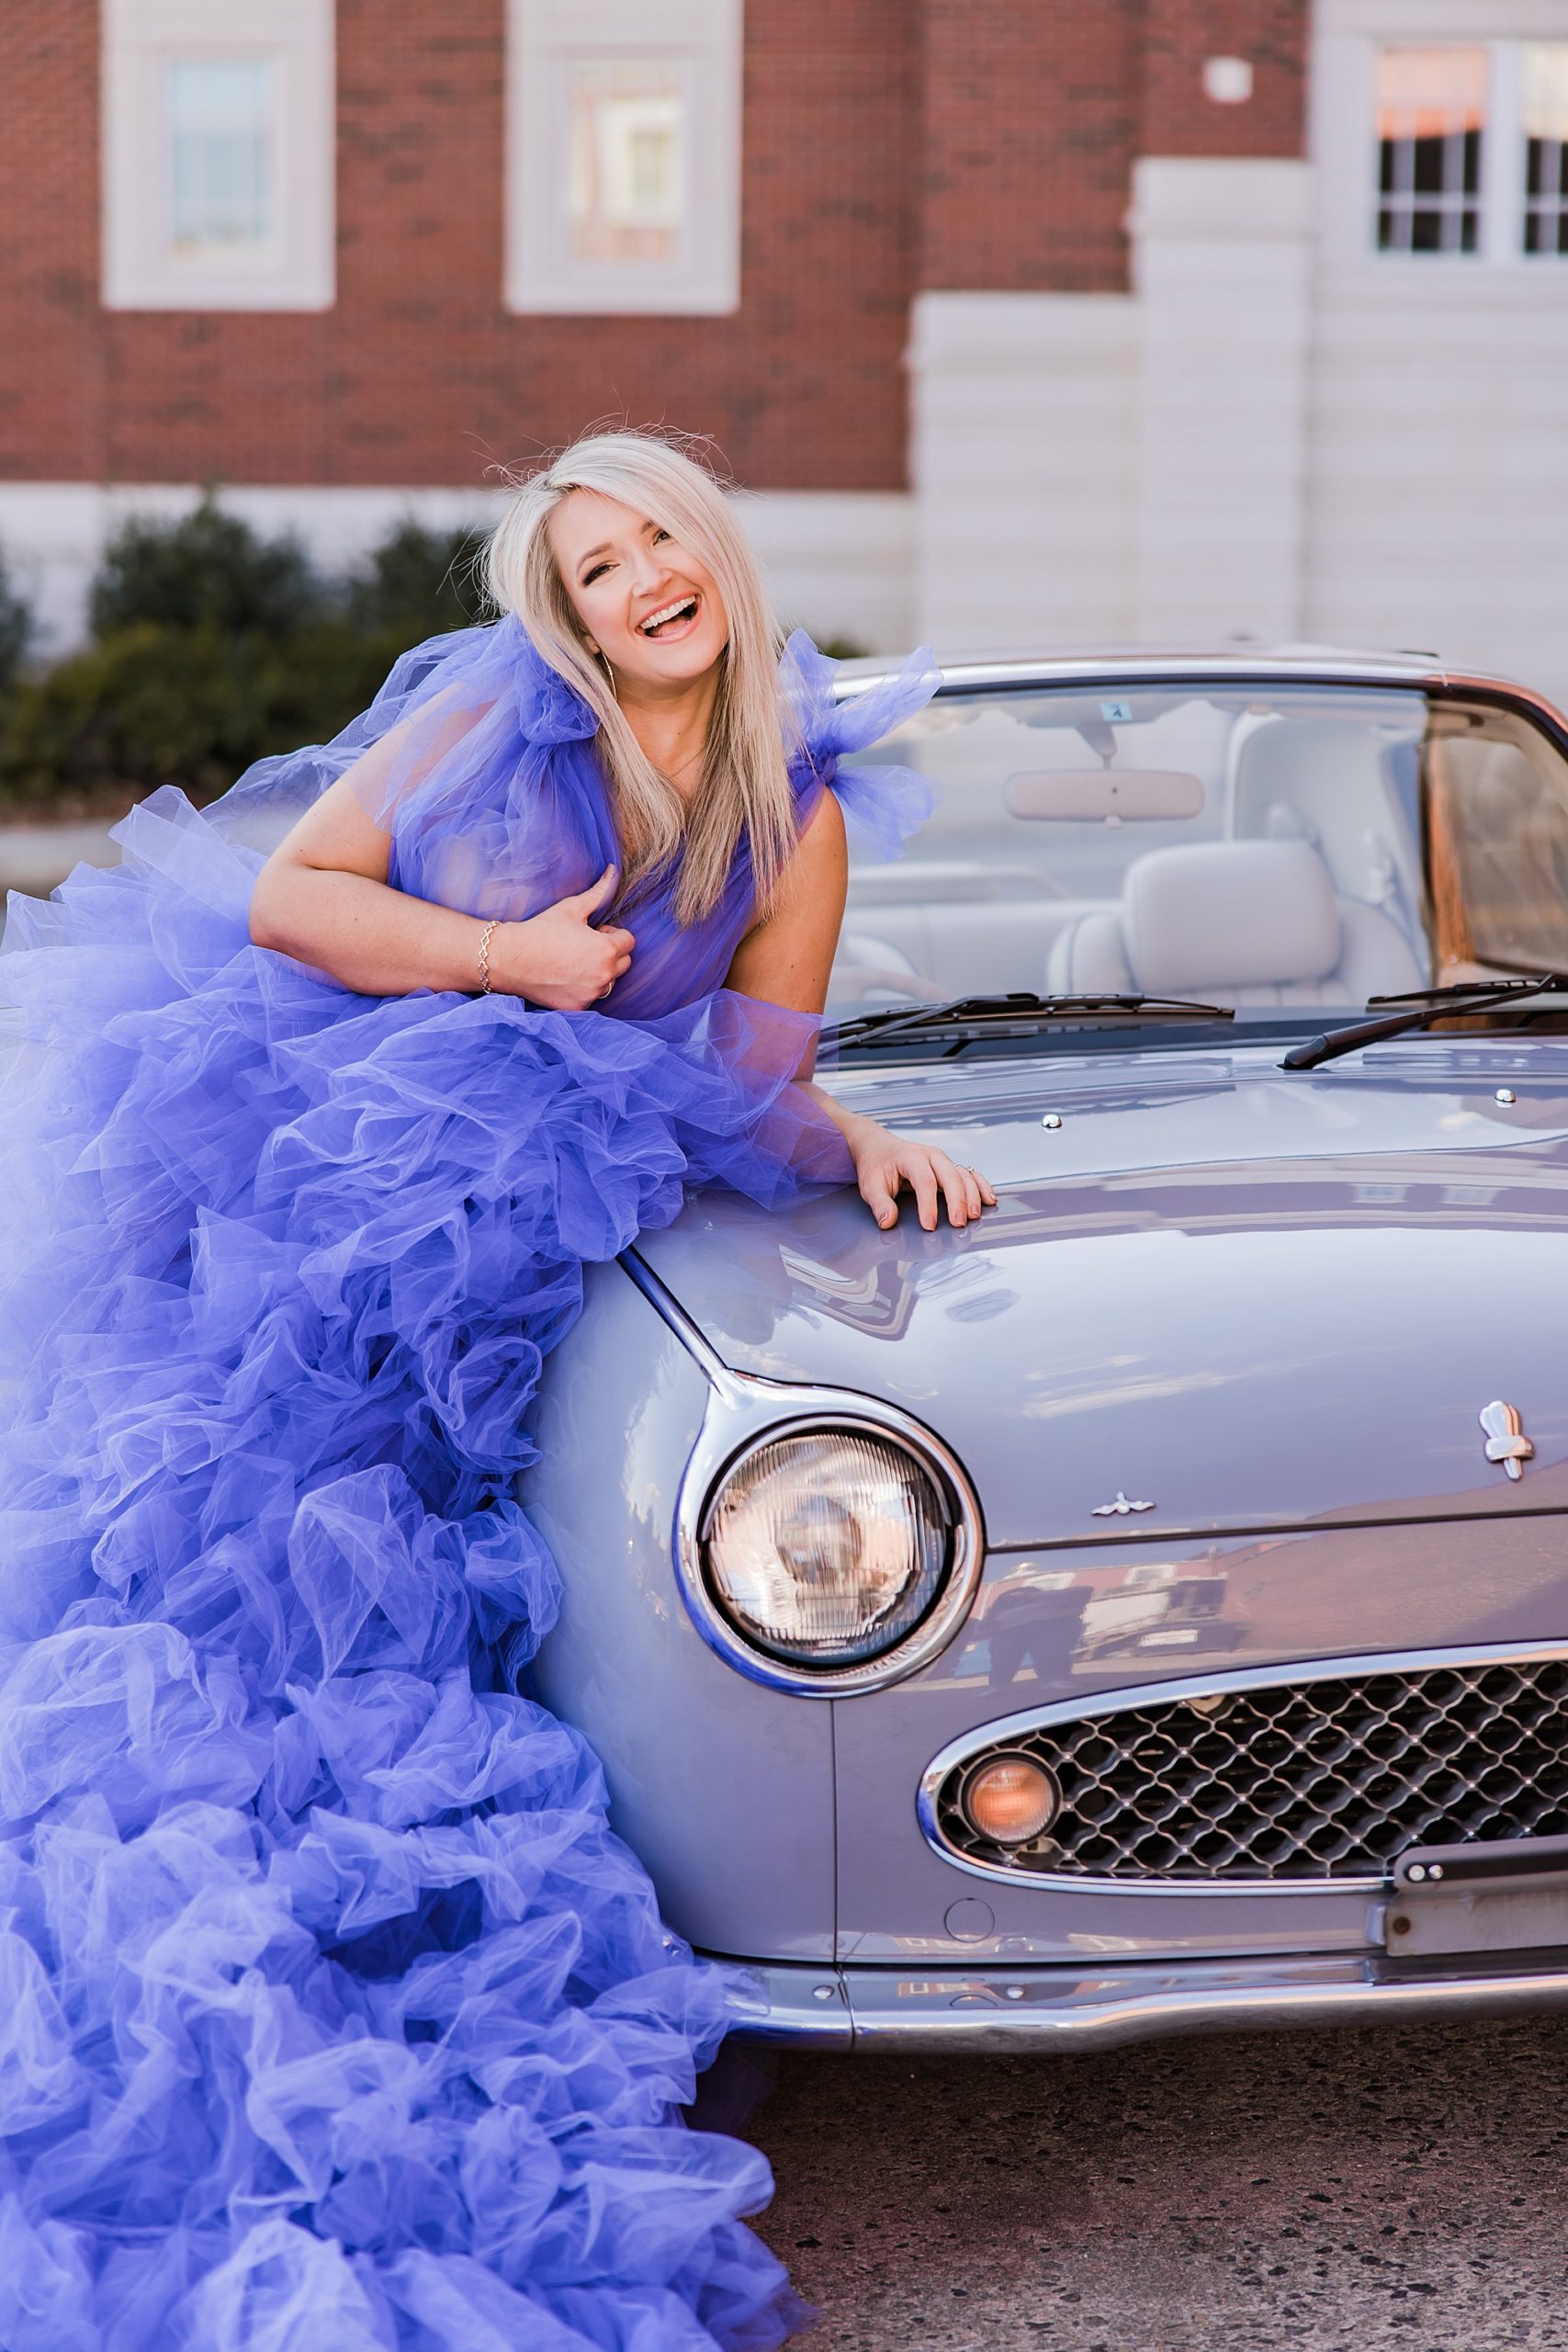 makeup artist in dramatic purple gown leans against car